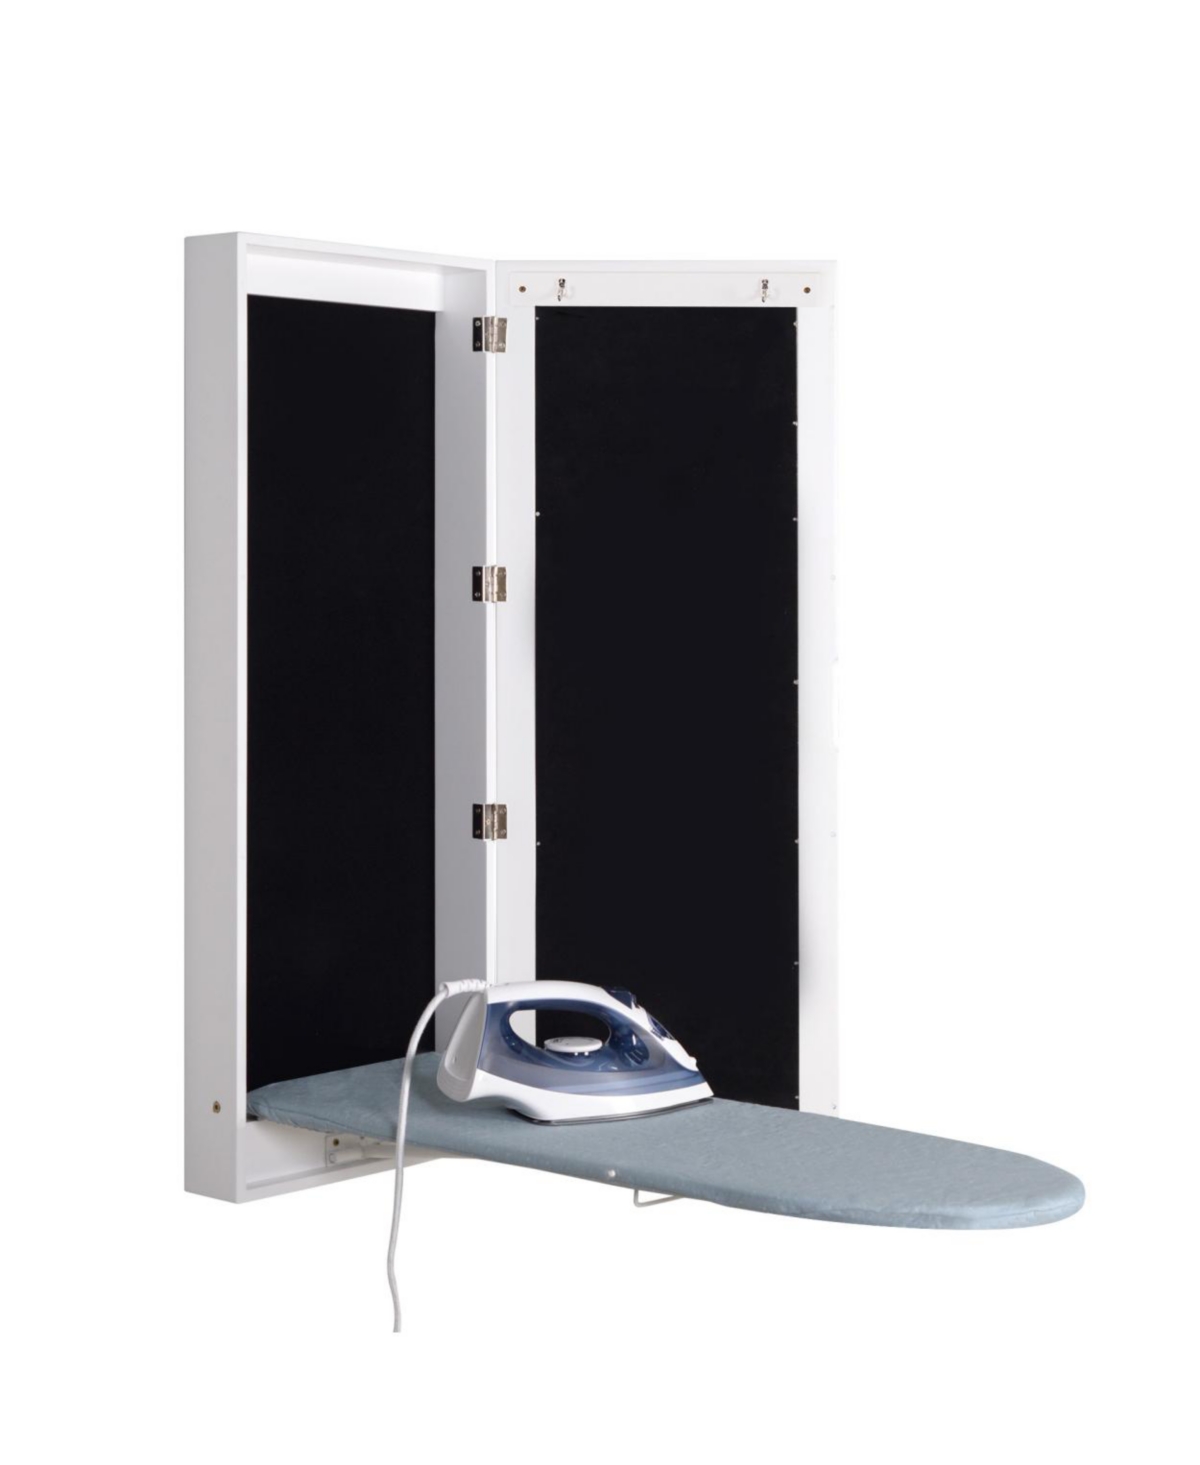 Foldable Ironing Cabinet with Mirror Door - White